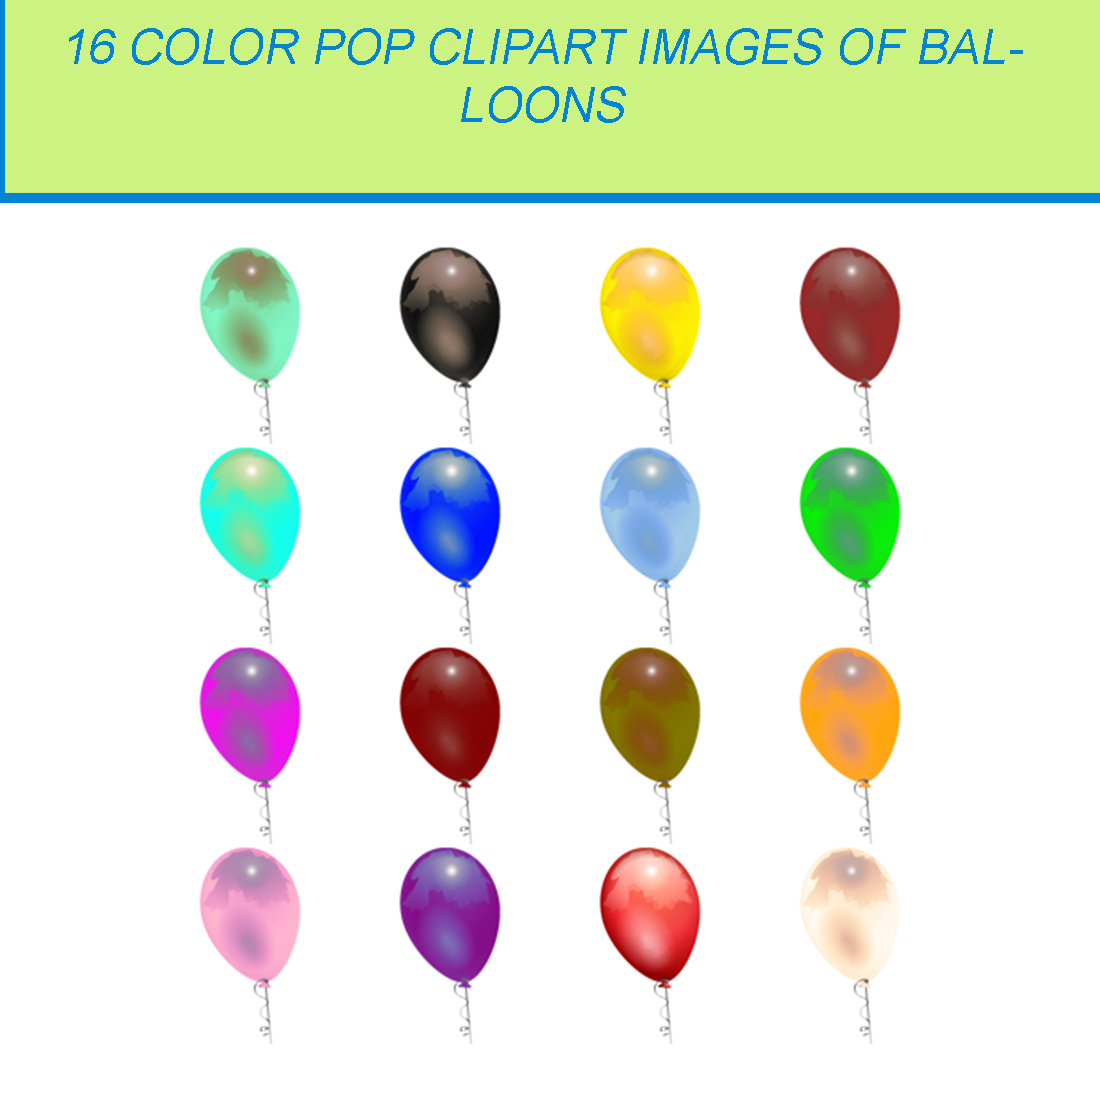 16 COLOR POP CLIPART IMAGES OF BALLOONS cover image.